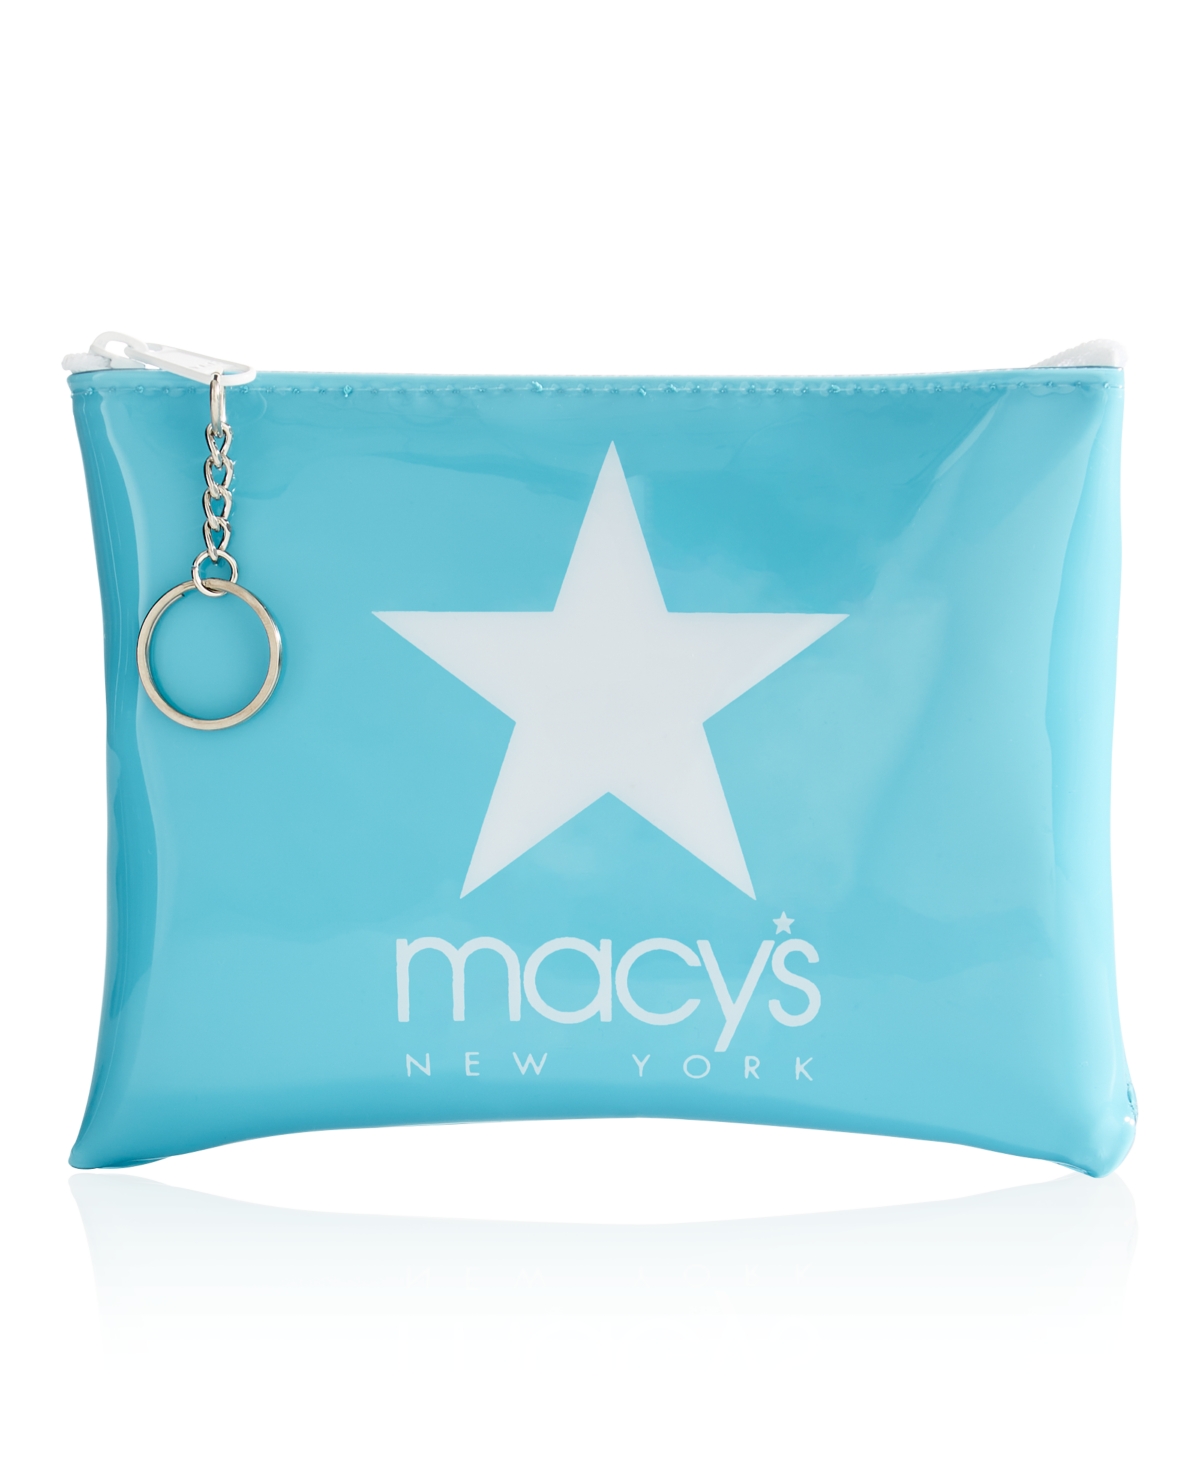 Dani Accessories Macy's Star Cosmetics Travel Case, Created for Macy's